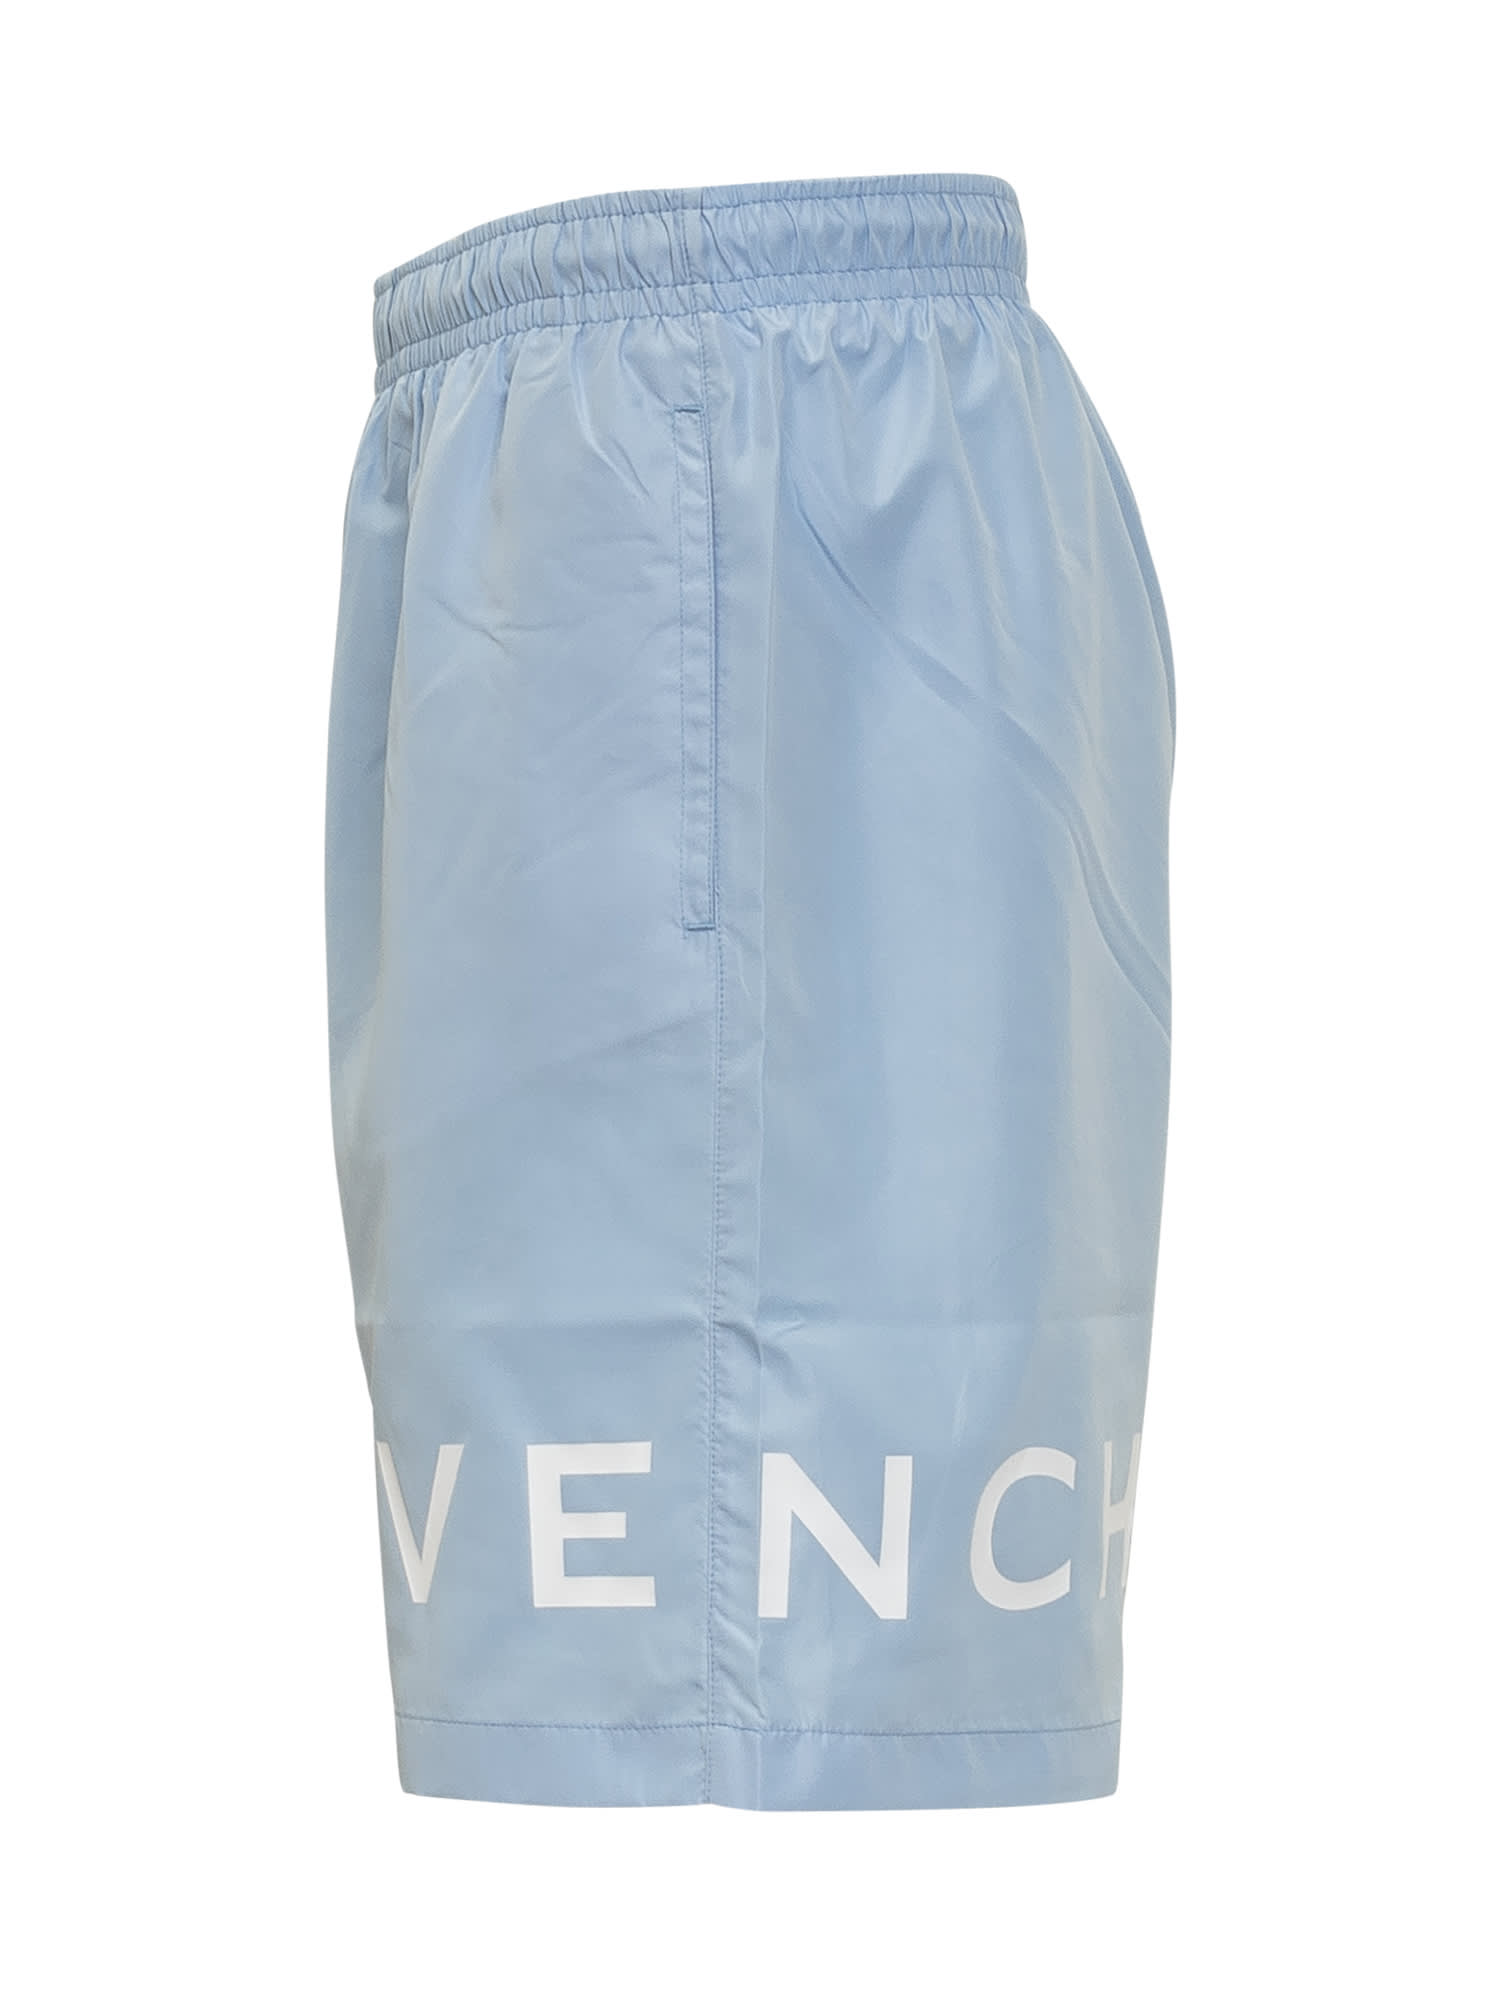 Shop Givenchy Swimwear In Baby Blue